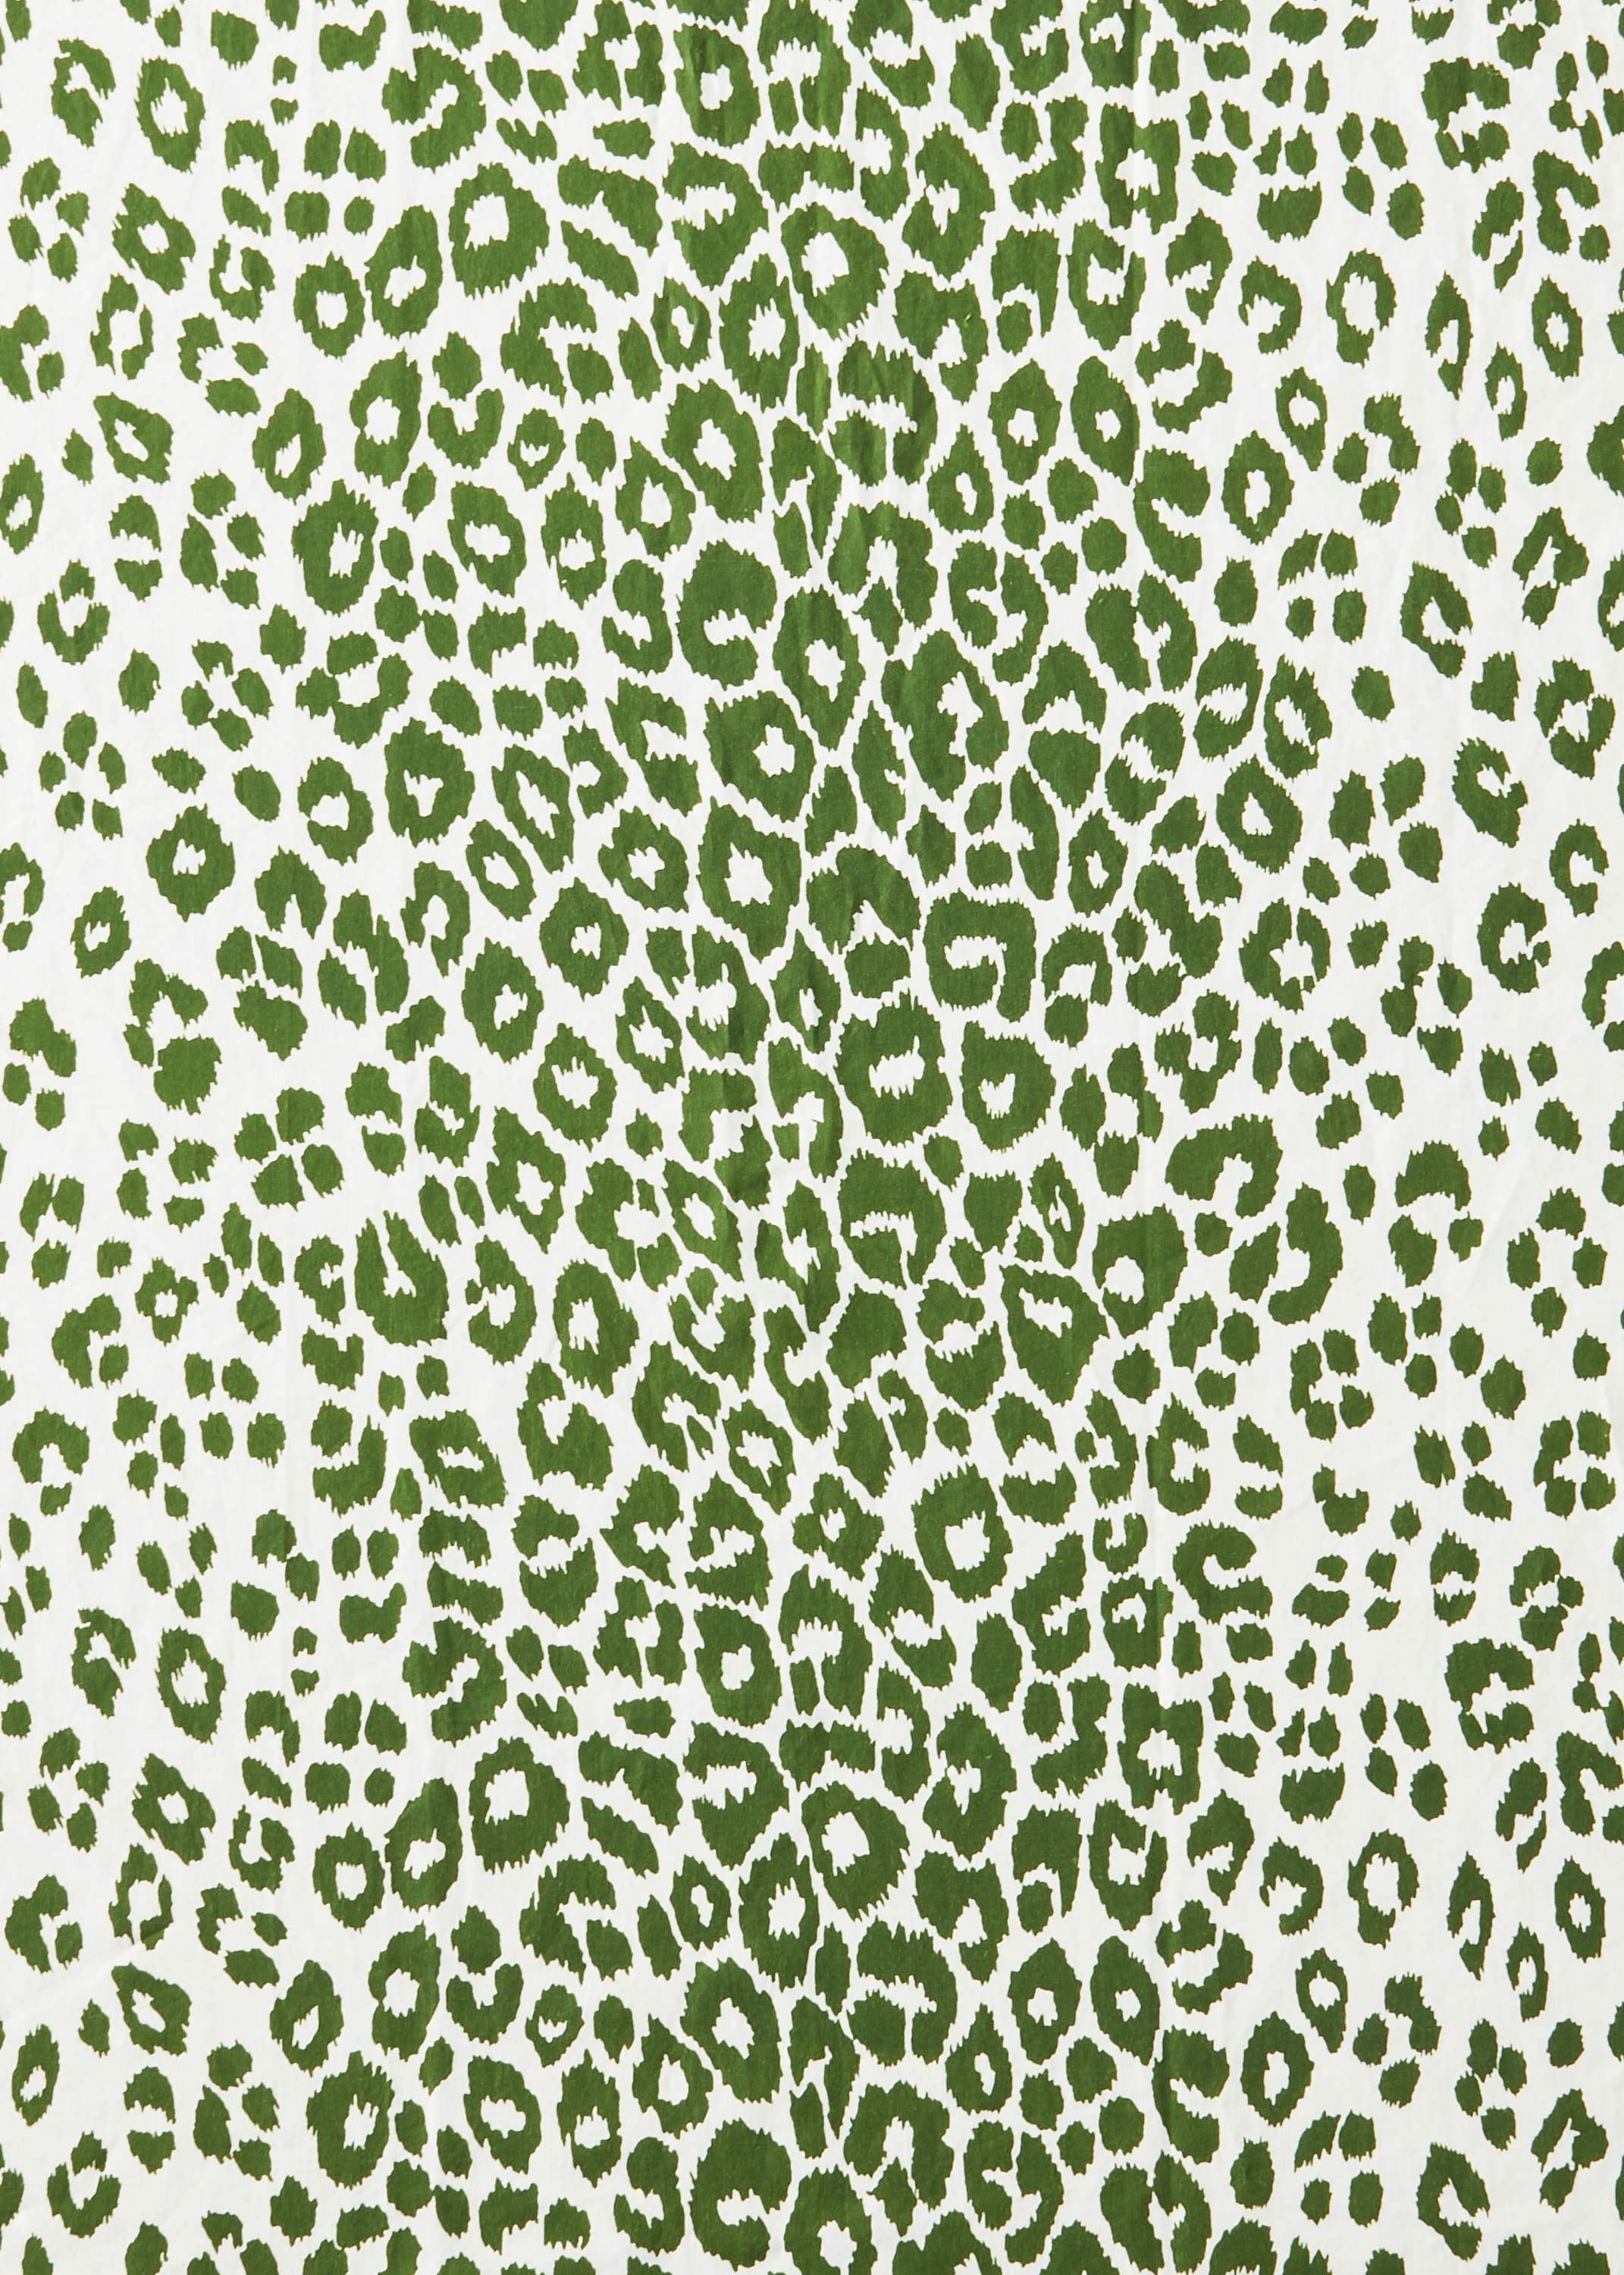 Matouk Schumacher Iconic Leopard Round Tablecloth, 90" In Green